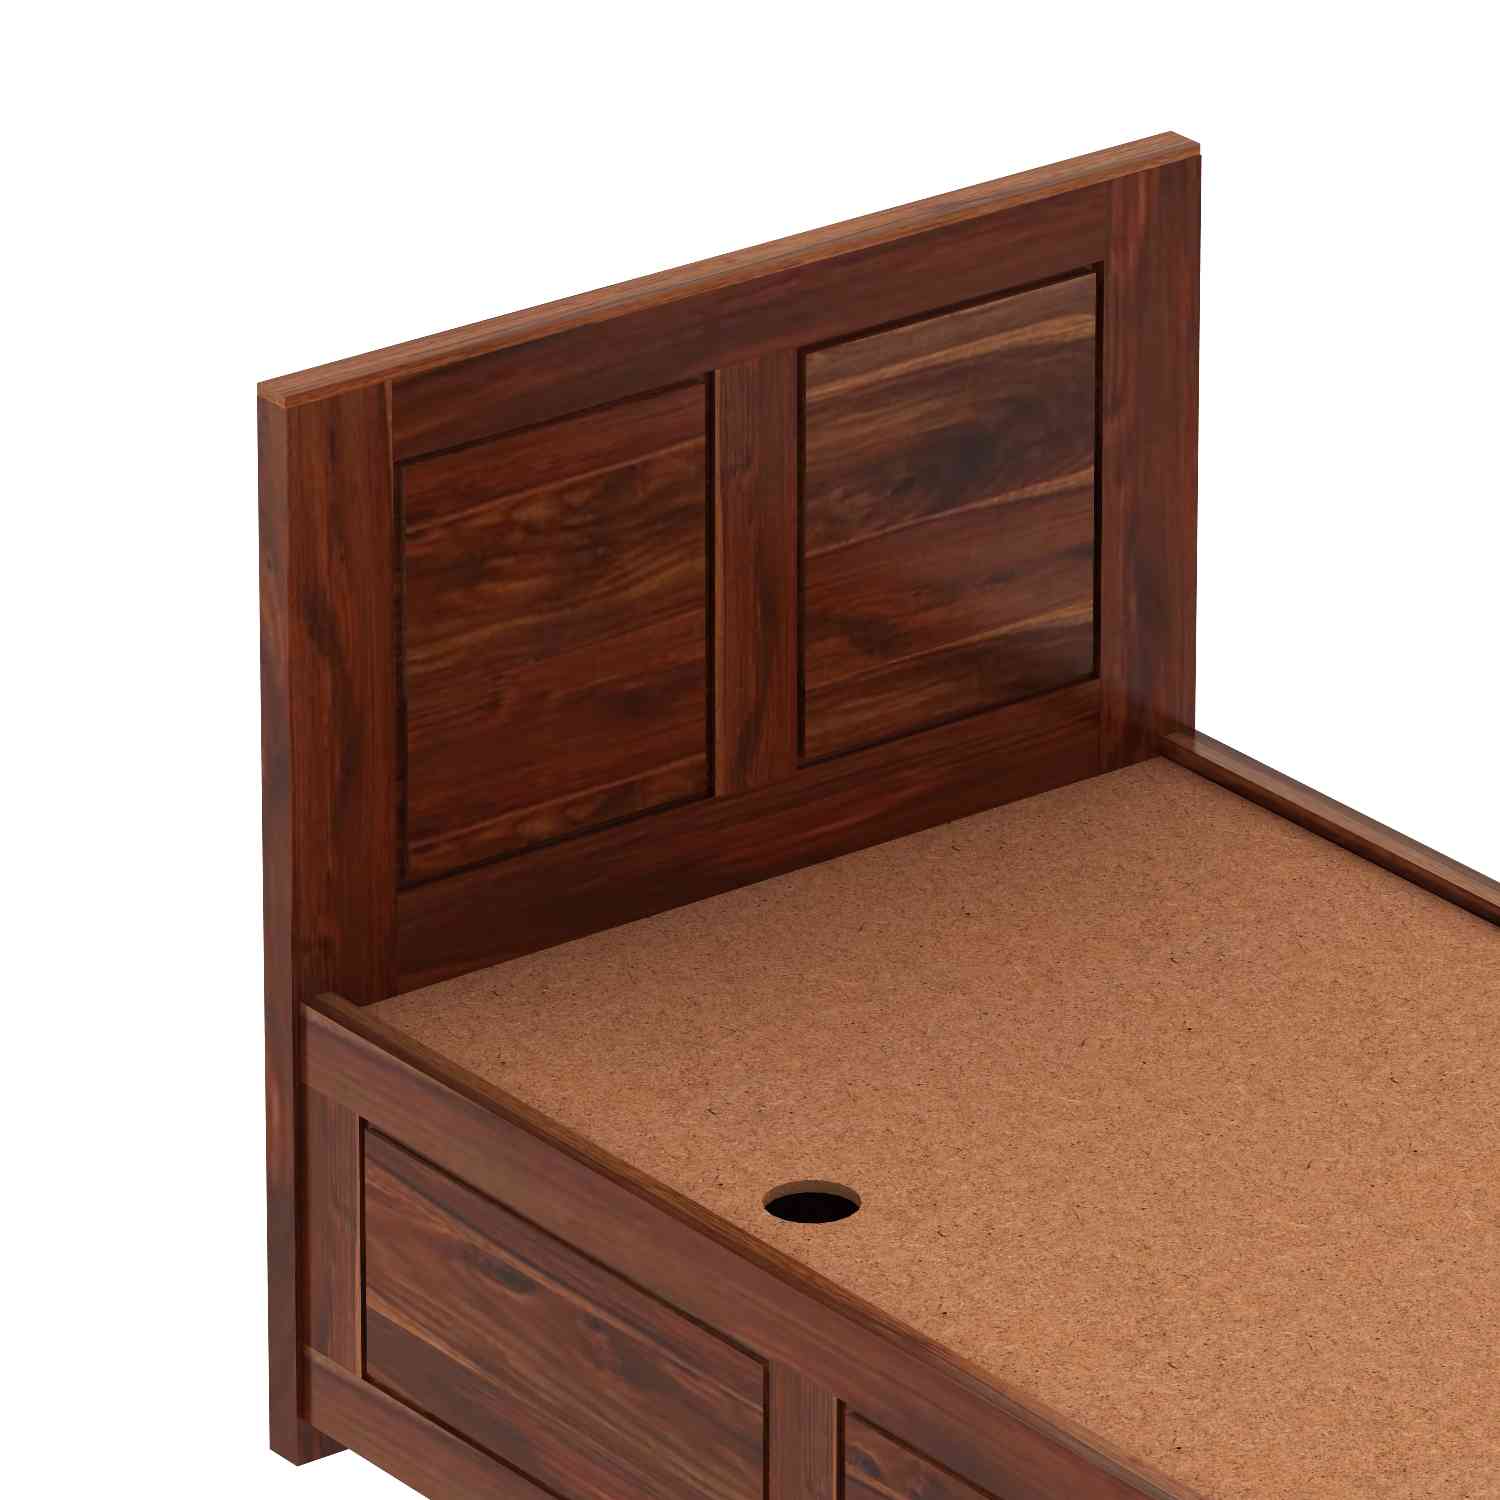 Woodwing Solid Sheesham Wood Single Bed With Box Storage (Natural Finish)